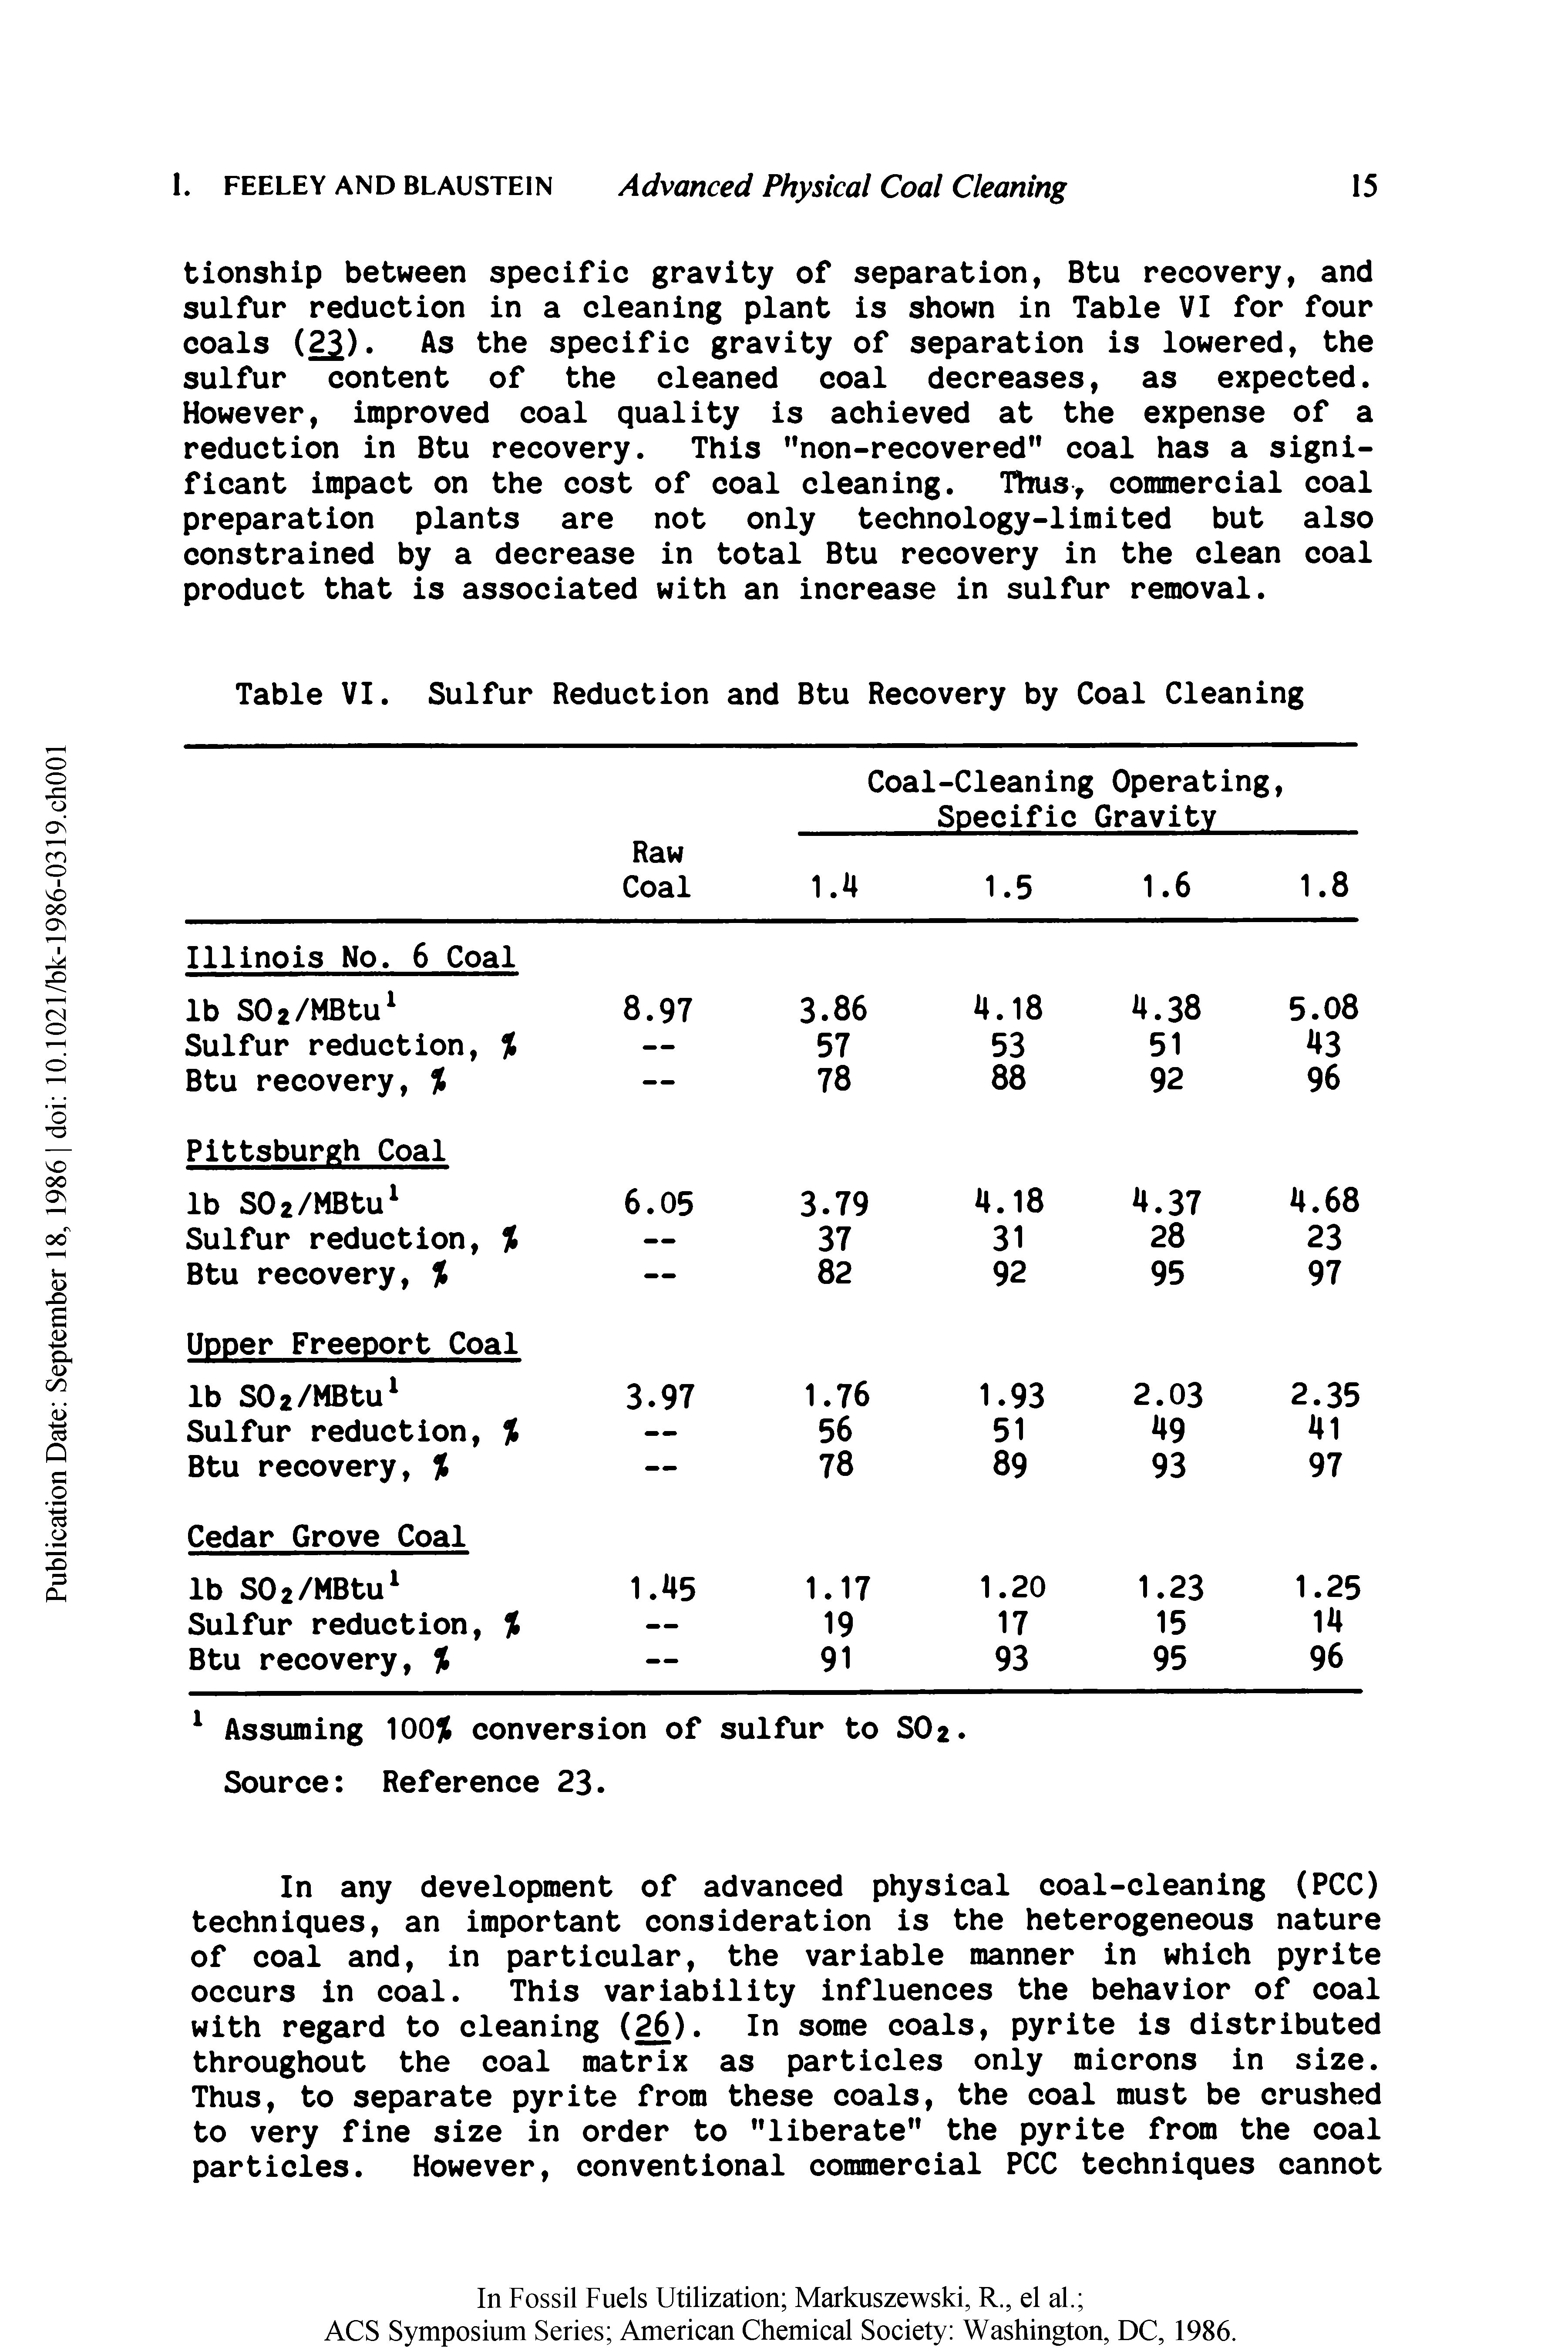 Table VI. Sulfur Reduction and Btu Recovery by Coal Cleaning...